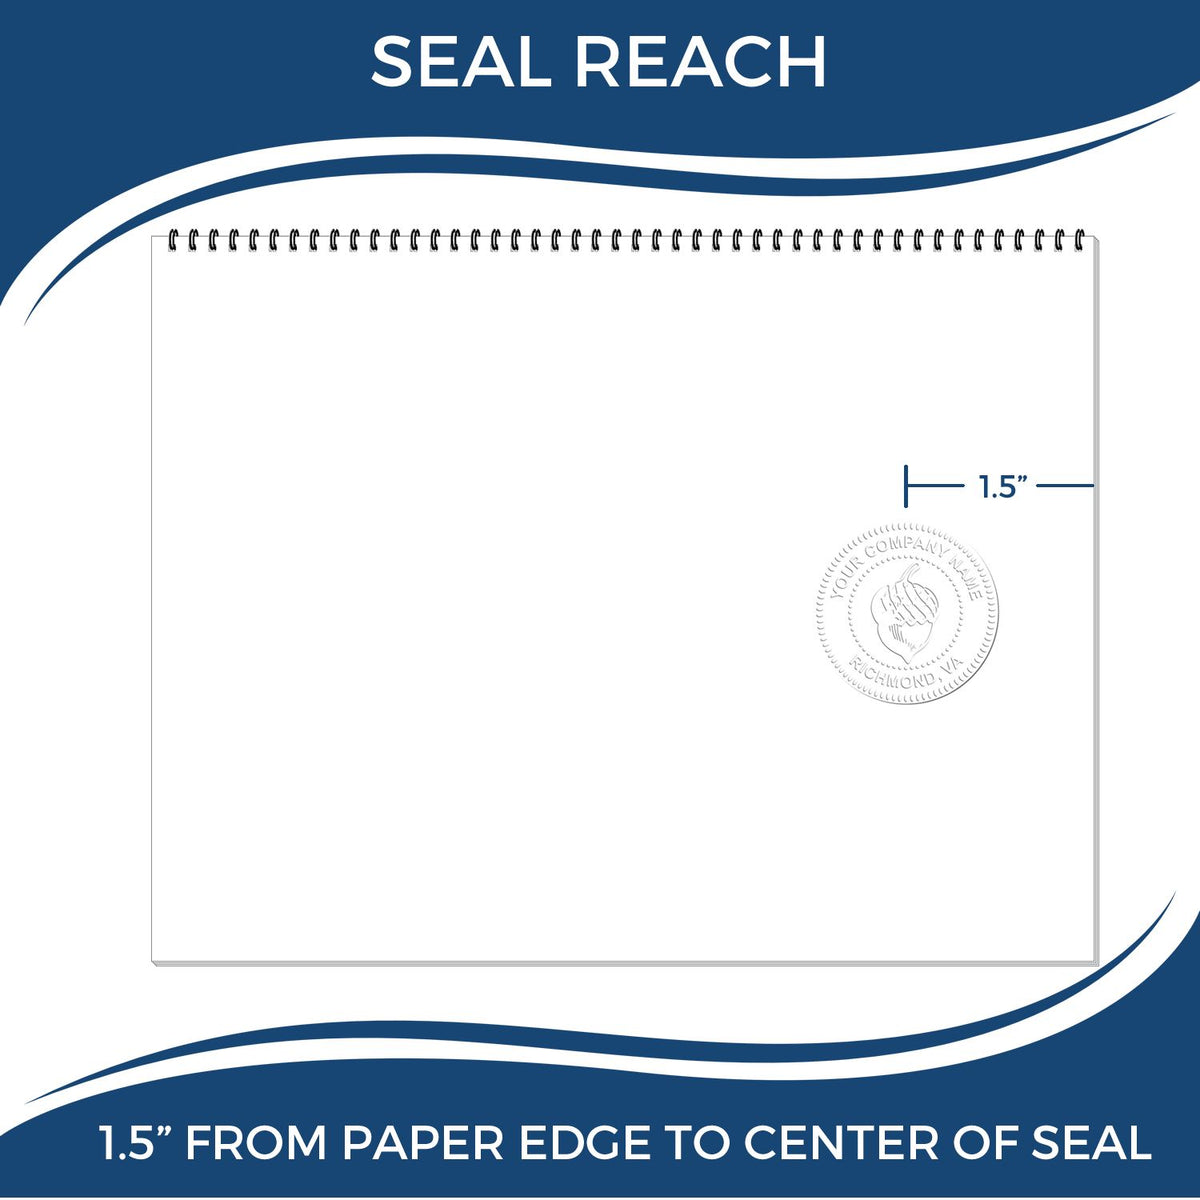 An infographic showing the seal reach which is represented by a ruler and a miniature seal image of the Hybrid Wyoming Architect Seal